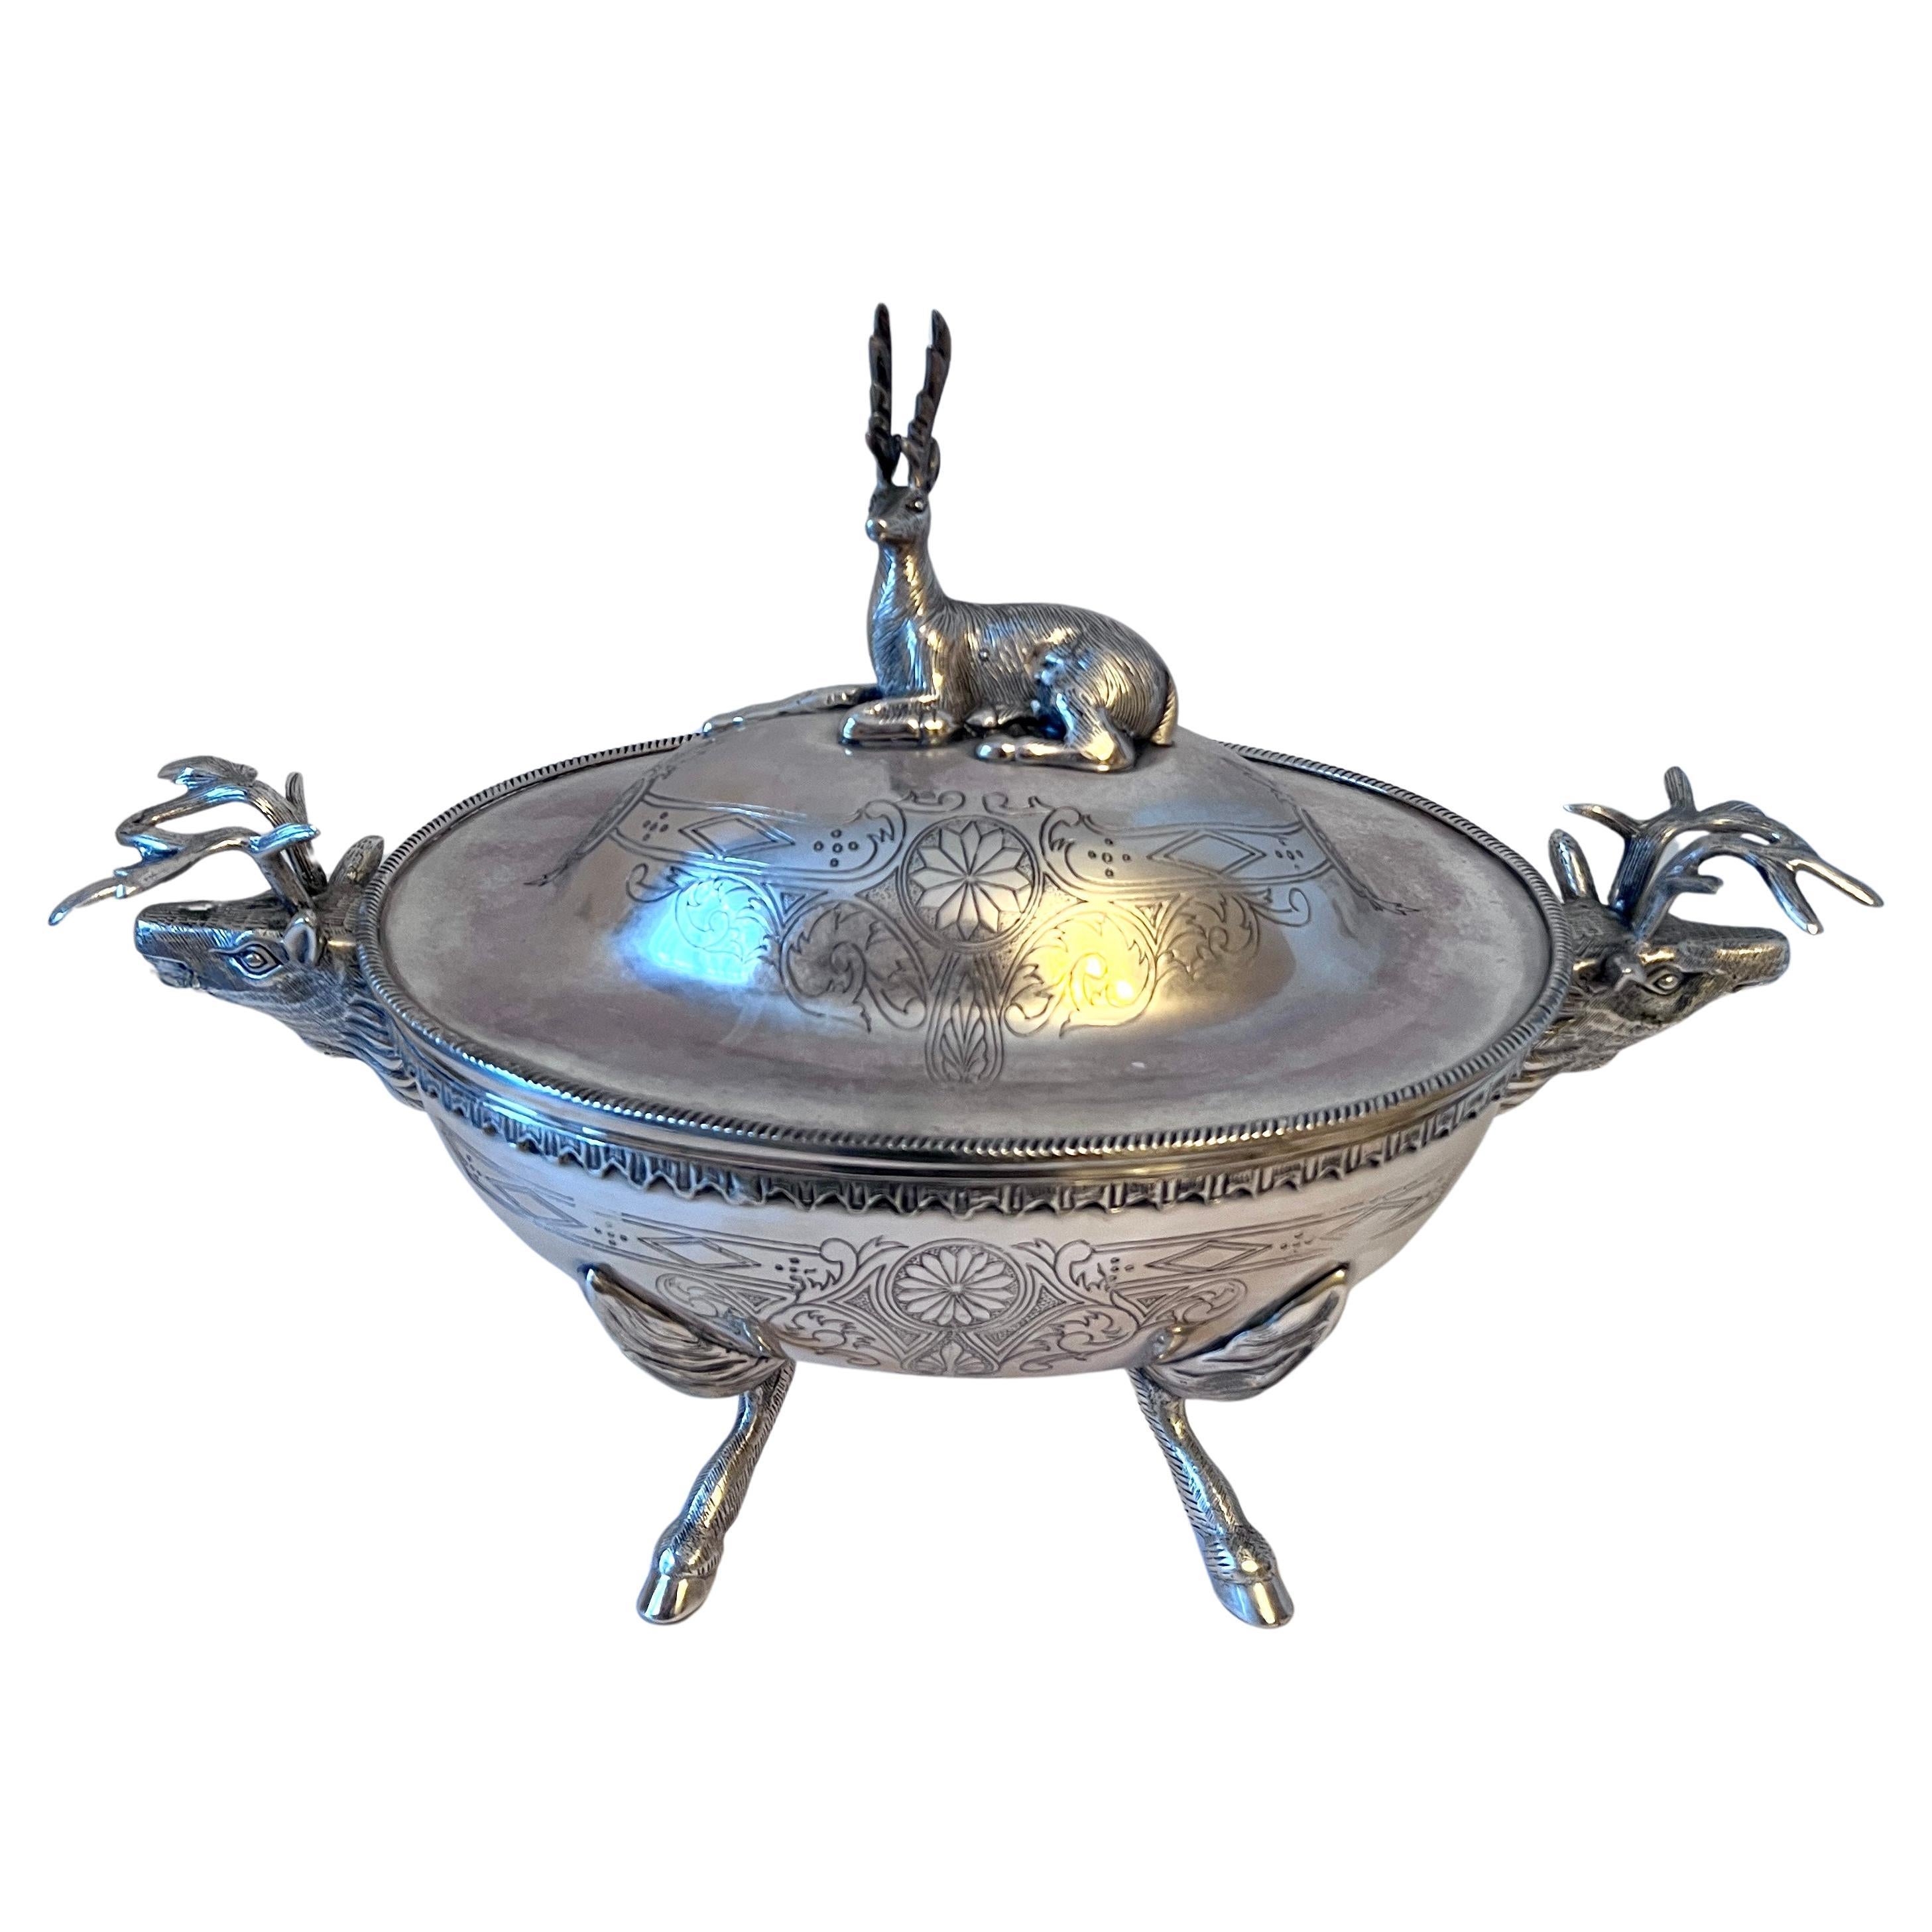 Silverplate Footed Covered Bowl with Stag Lid and Side Handles and Hoof Feet